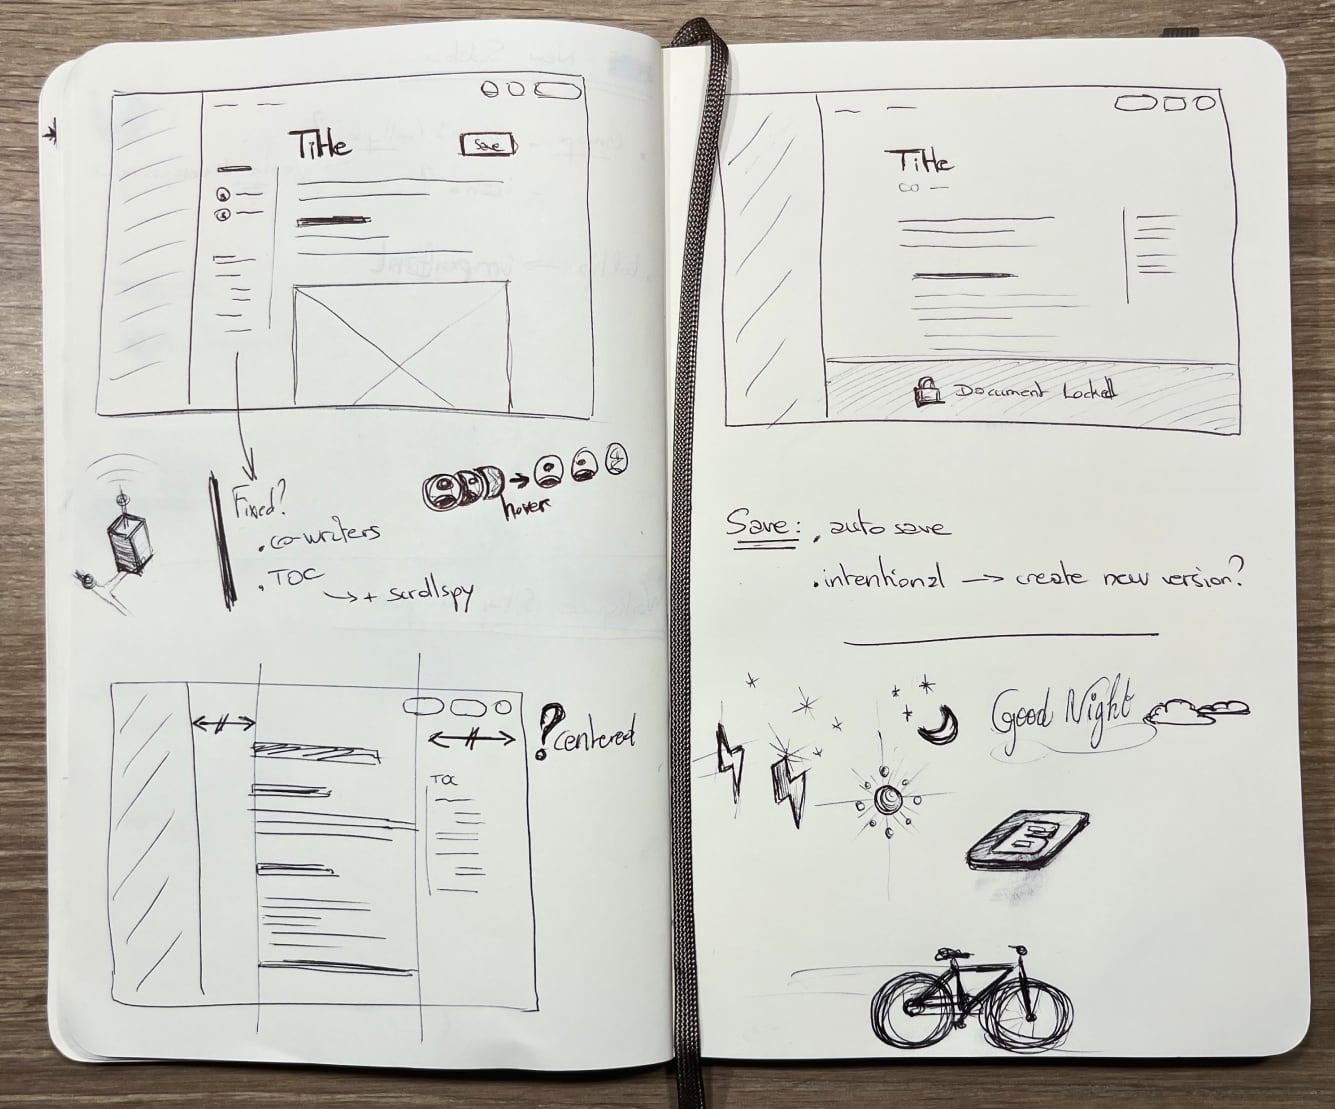 Sketches of the collaborative documents on my notebook